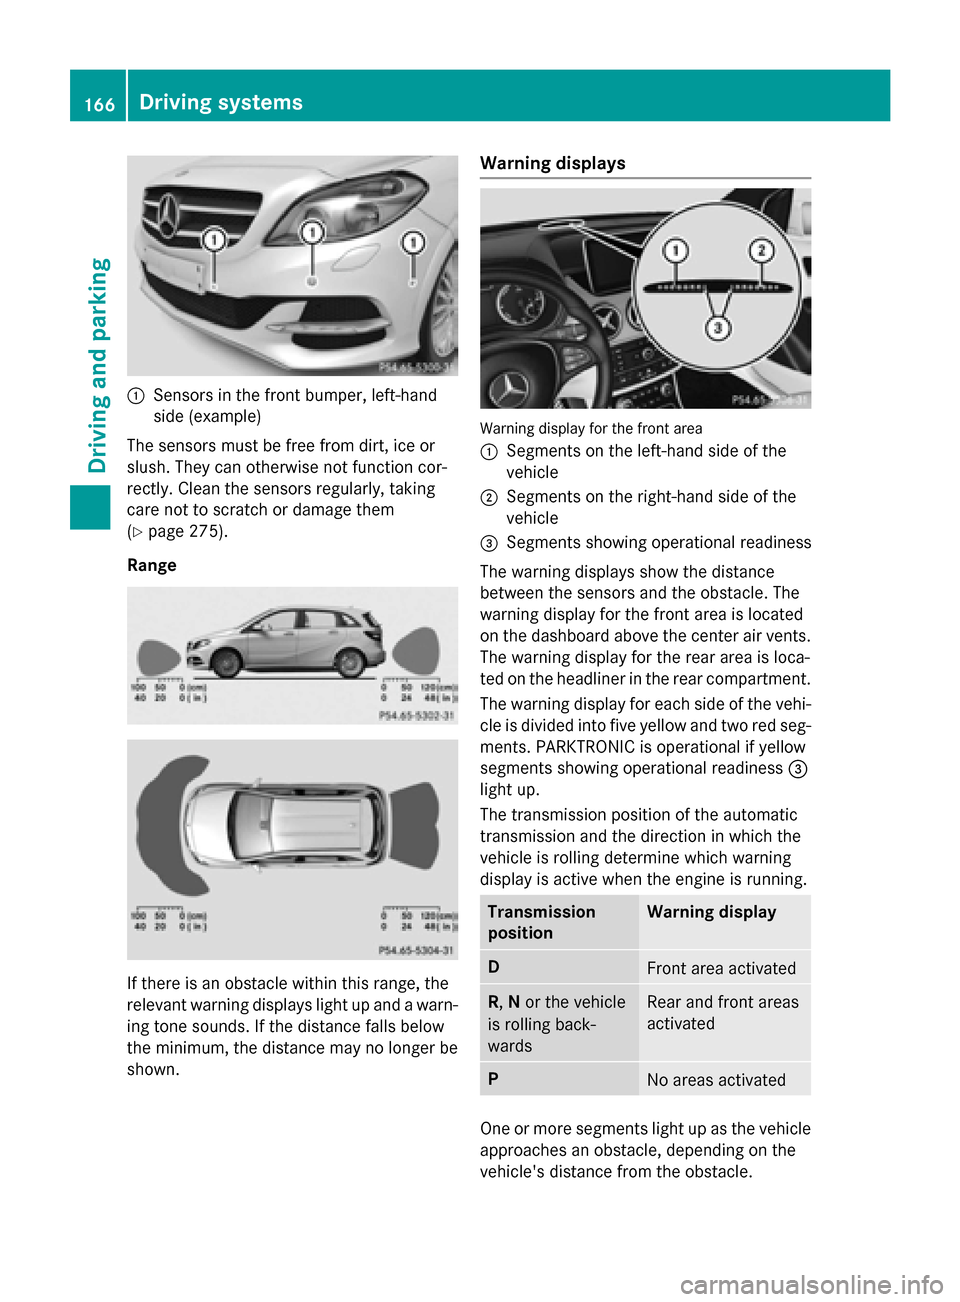 MERCEDES-BENZ B-Class ELECTRIC 2015 W246 Owners Manual :
Sensors in the front bumper, left-hand
side (example)
The sensors must be free from dirt, ice or
slush. They can otherwise not function cor-
rectly. Clean the sensors regularly, taking
care not to s